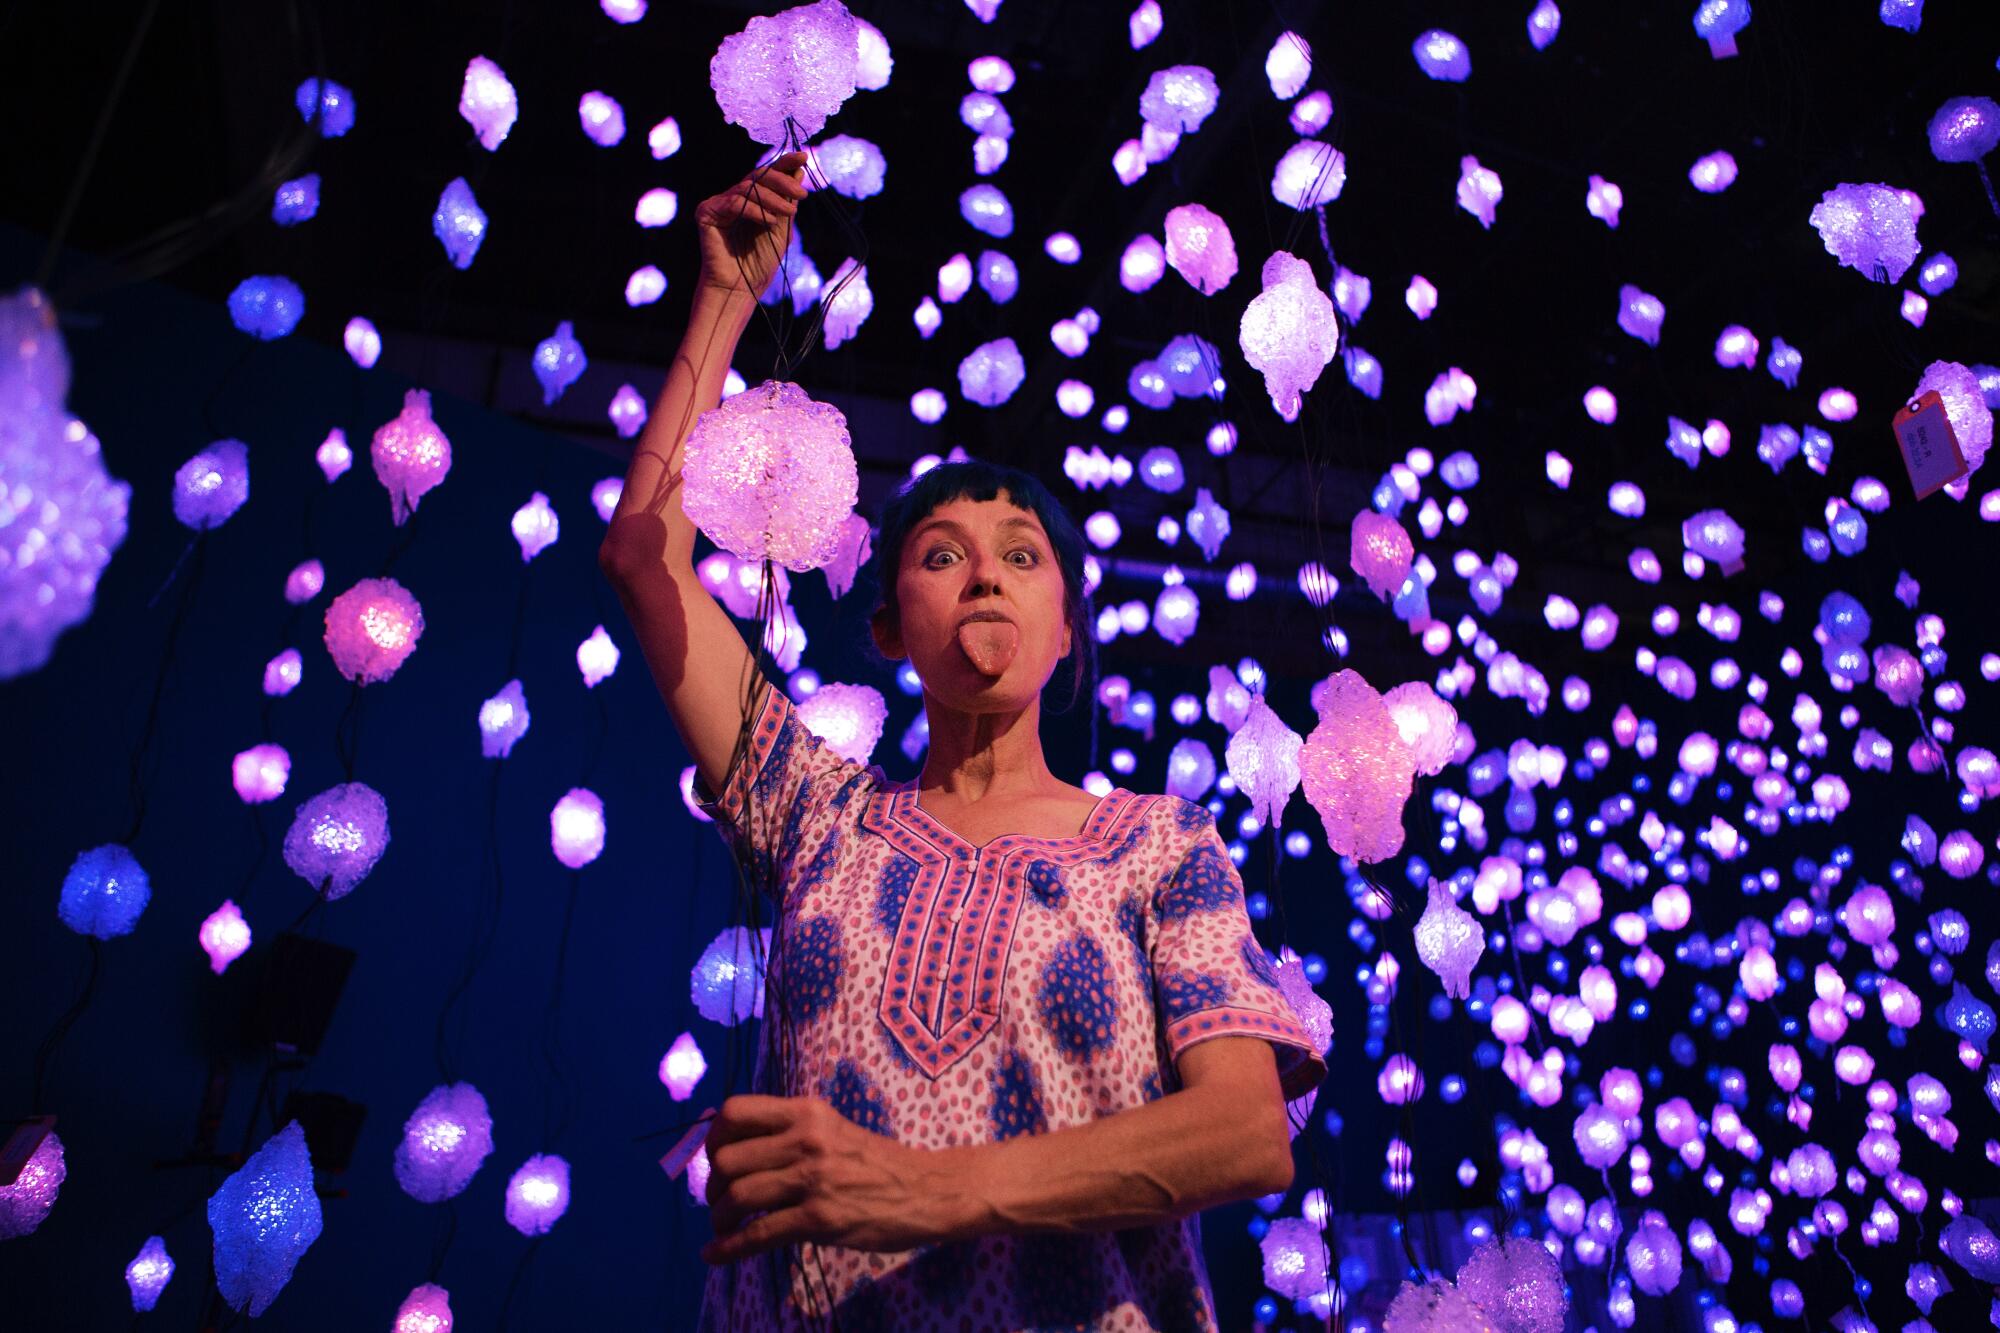 Pipilotti Rist sticks out her tongue while standing amid dozens of pink and purple lights that dangle from the ceiling.